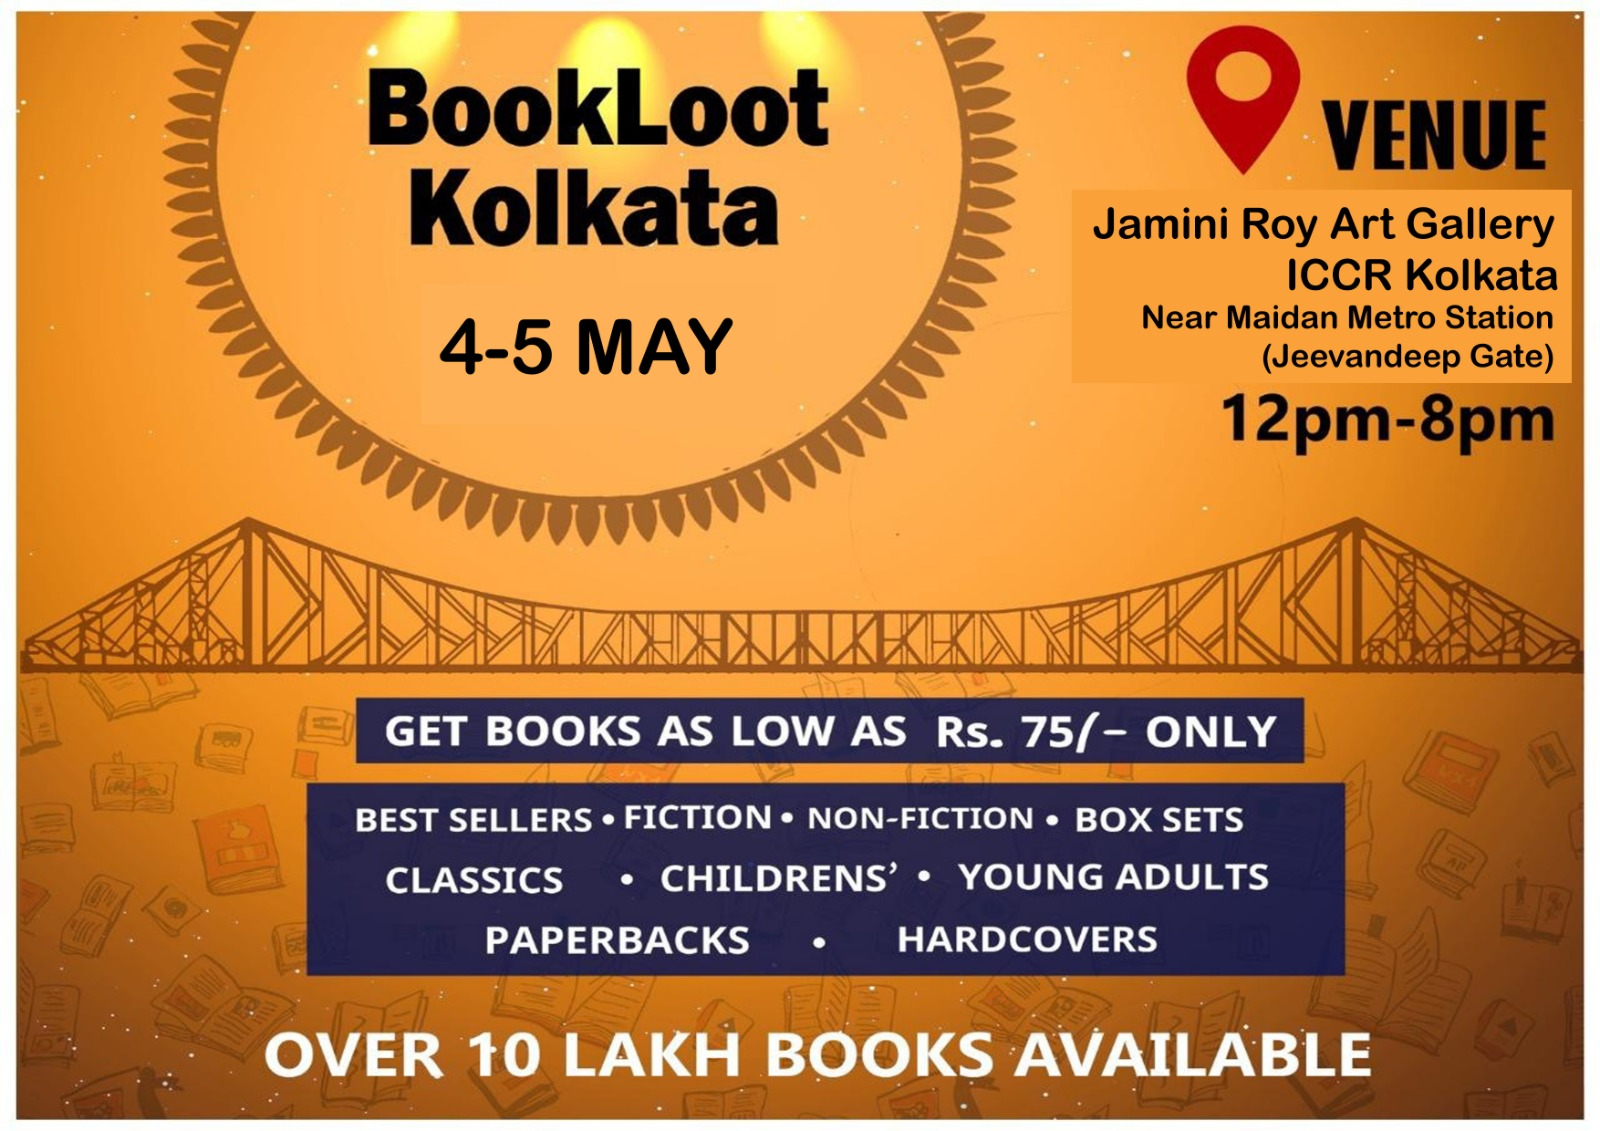 BookLoot Kolkata, Summer Sale – Get Books Priced As Low As ₹75 only, Kolkata, West Bengal, India